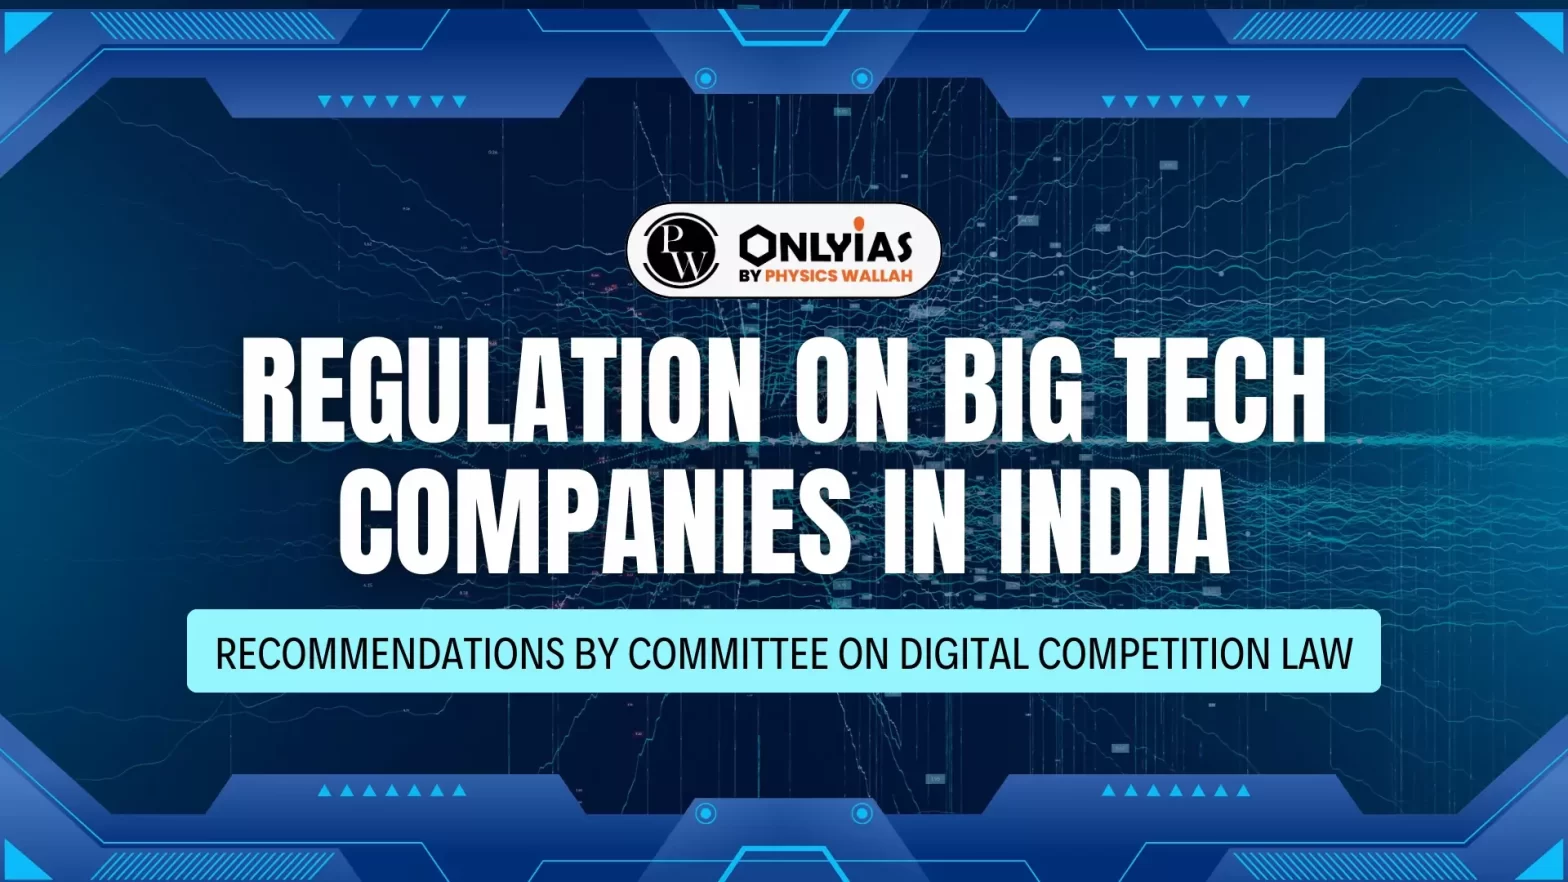 Regulation On Big Tech Companies in India: Recommendations by Committee on Digital Competition Law